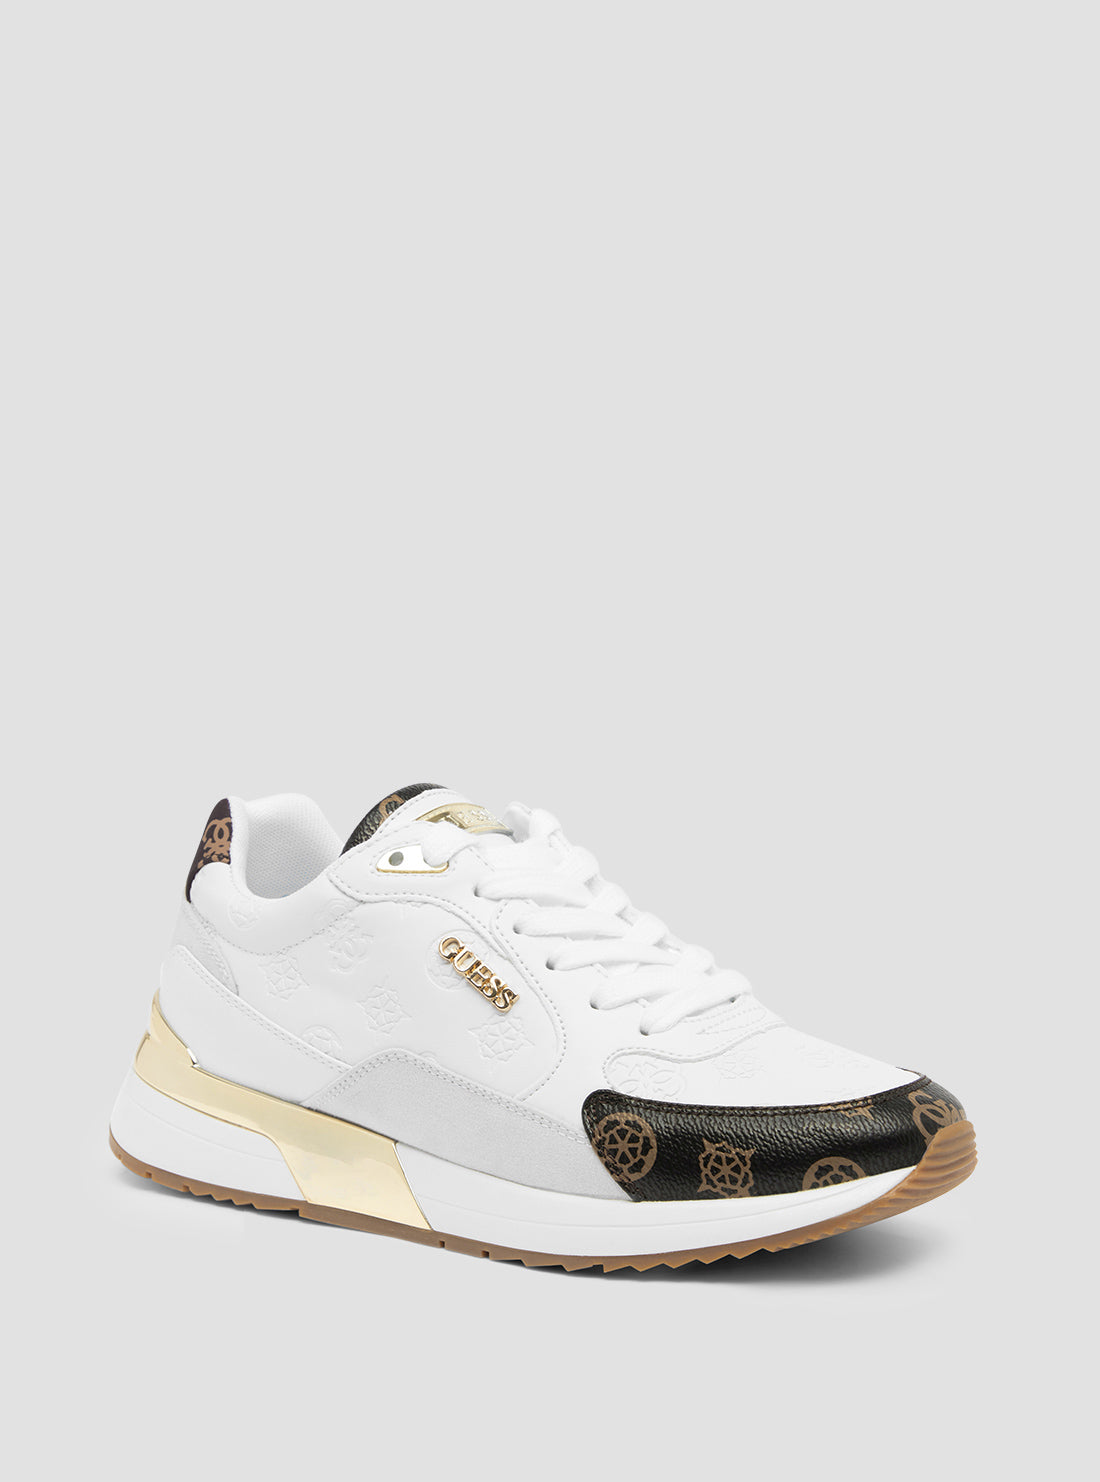 White Logo Moxea Sneakers | GUESS Women's Shoes | front view